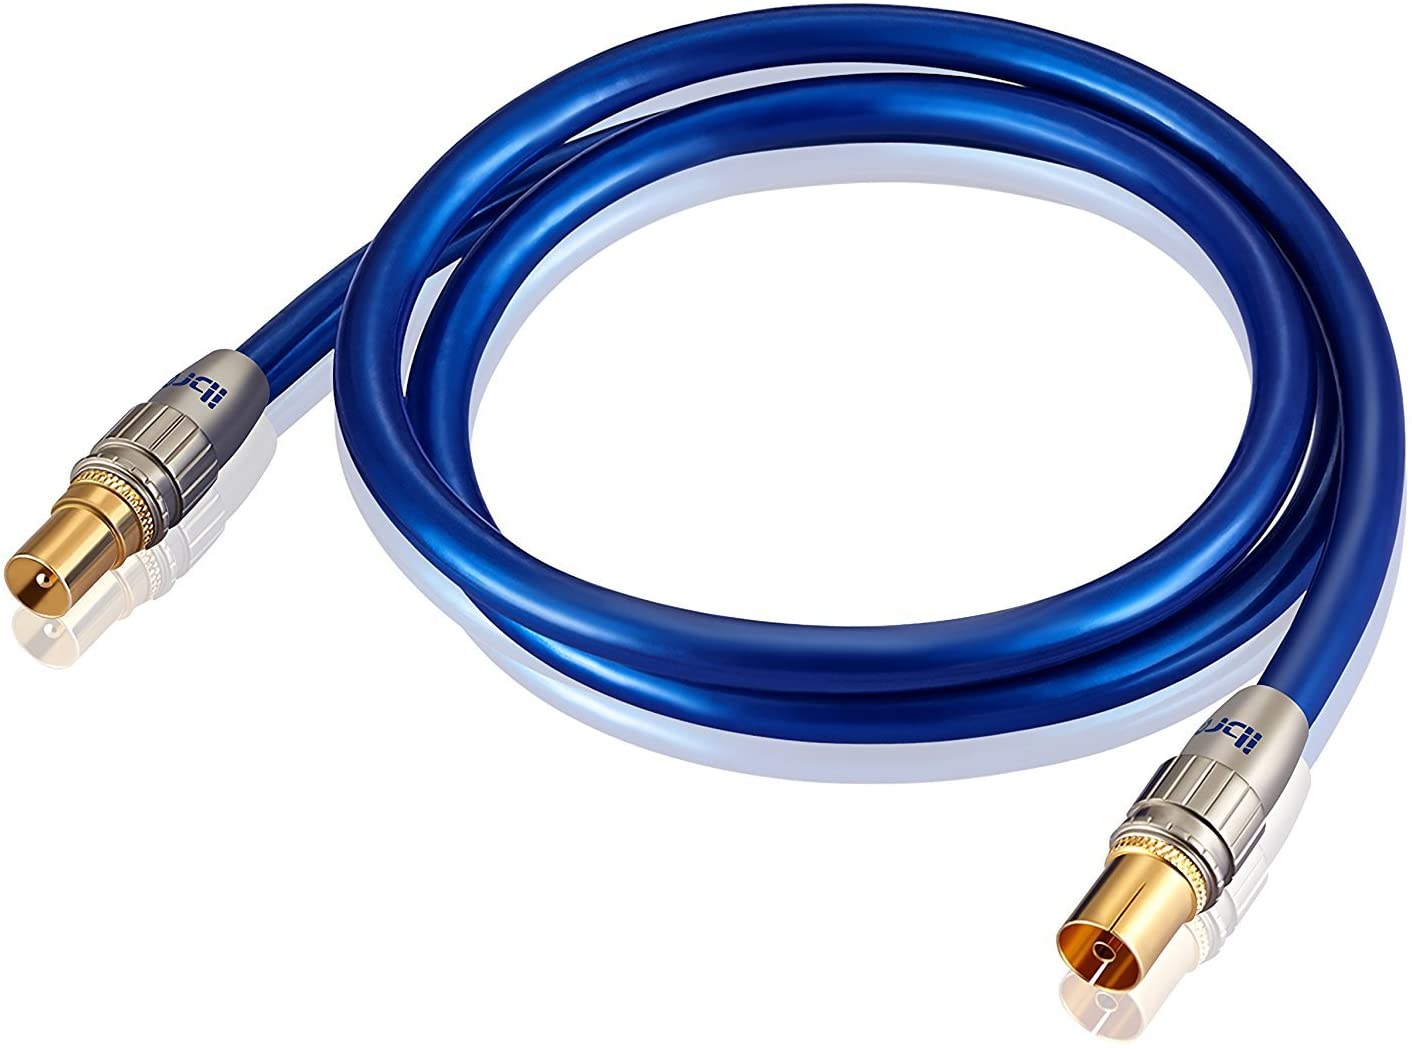 Pure OFC RF RG6 TV Aerial Coax Lead Gold Male to Female Extension Premium Cable - 12.5m IBRA Blue Gold Series